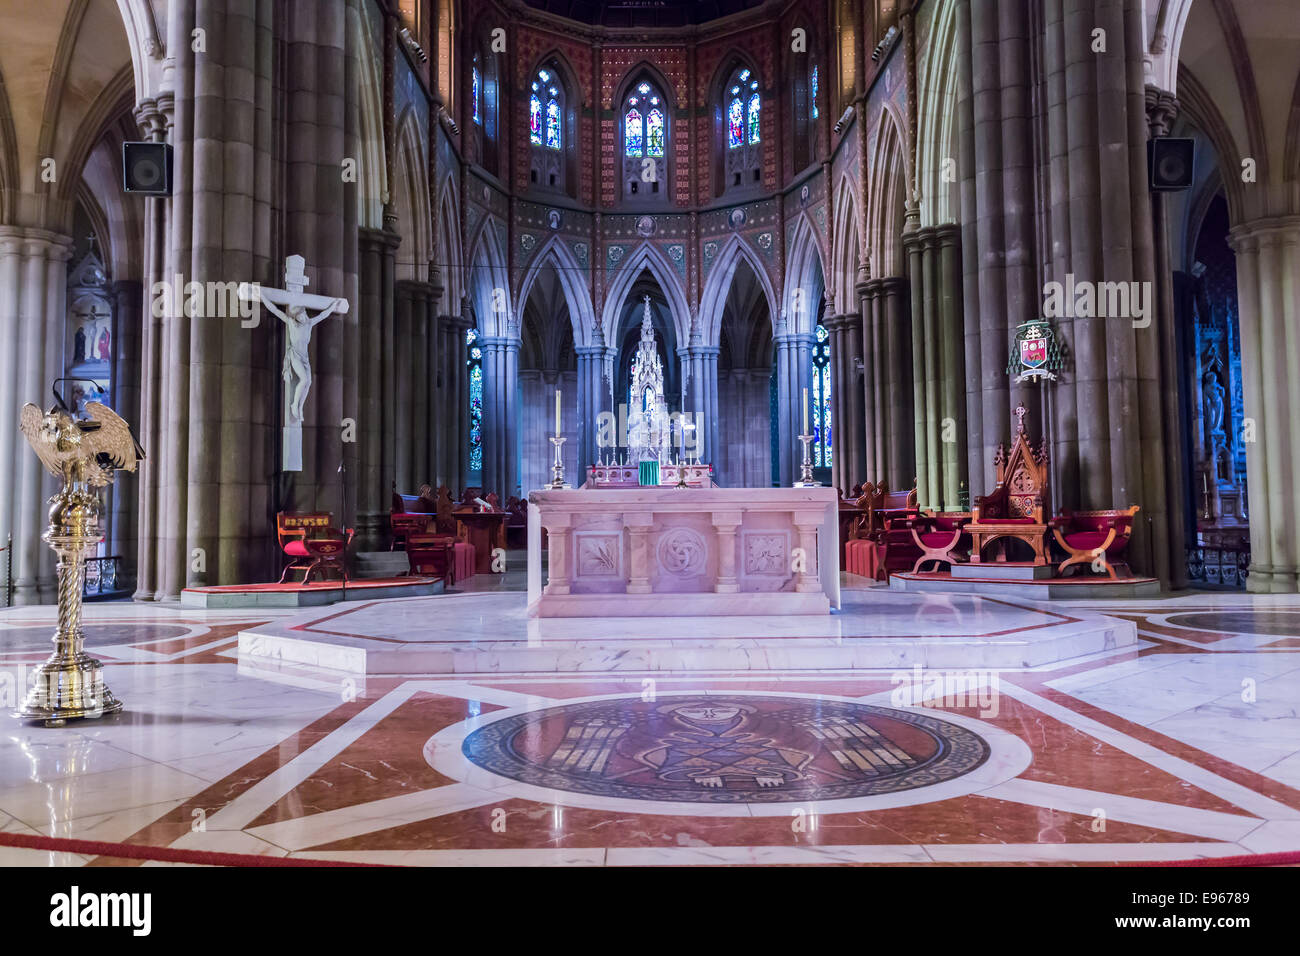 Interior of St Patrick's Cathedral, the cathedral church of the Roman Catholic Archdiocese of Melbourne in Victoria, Australia. Stock Photo